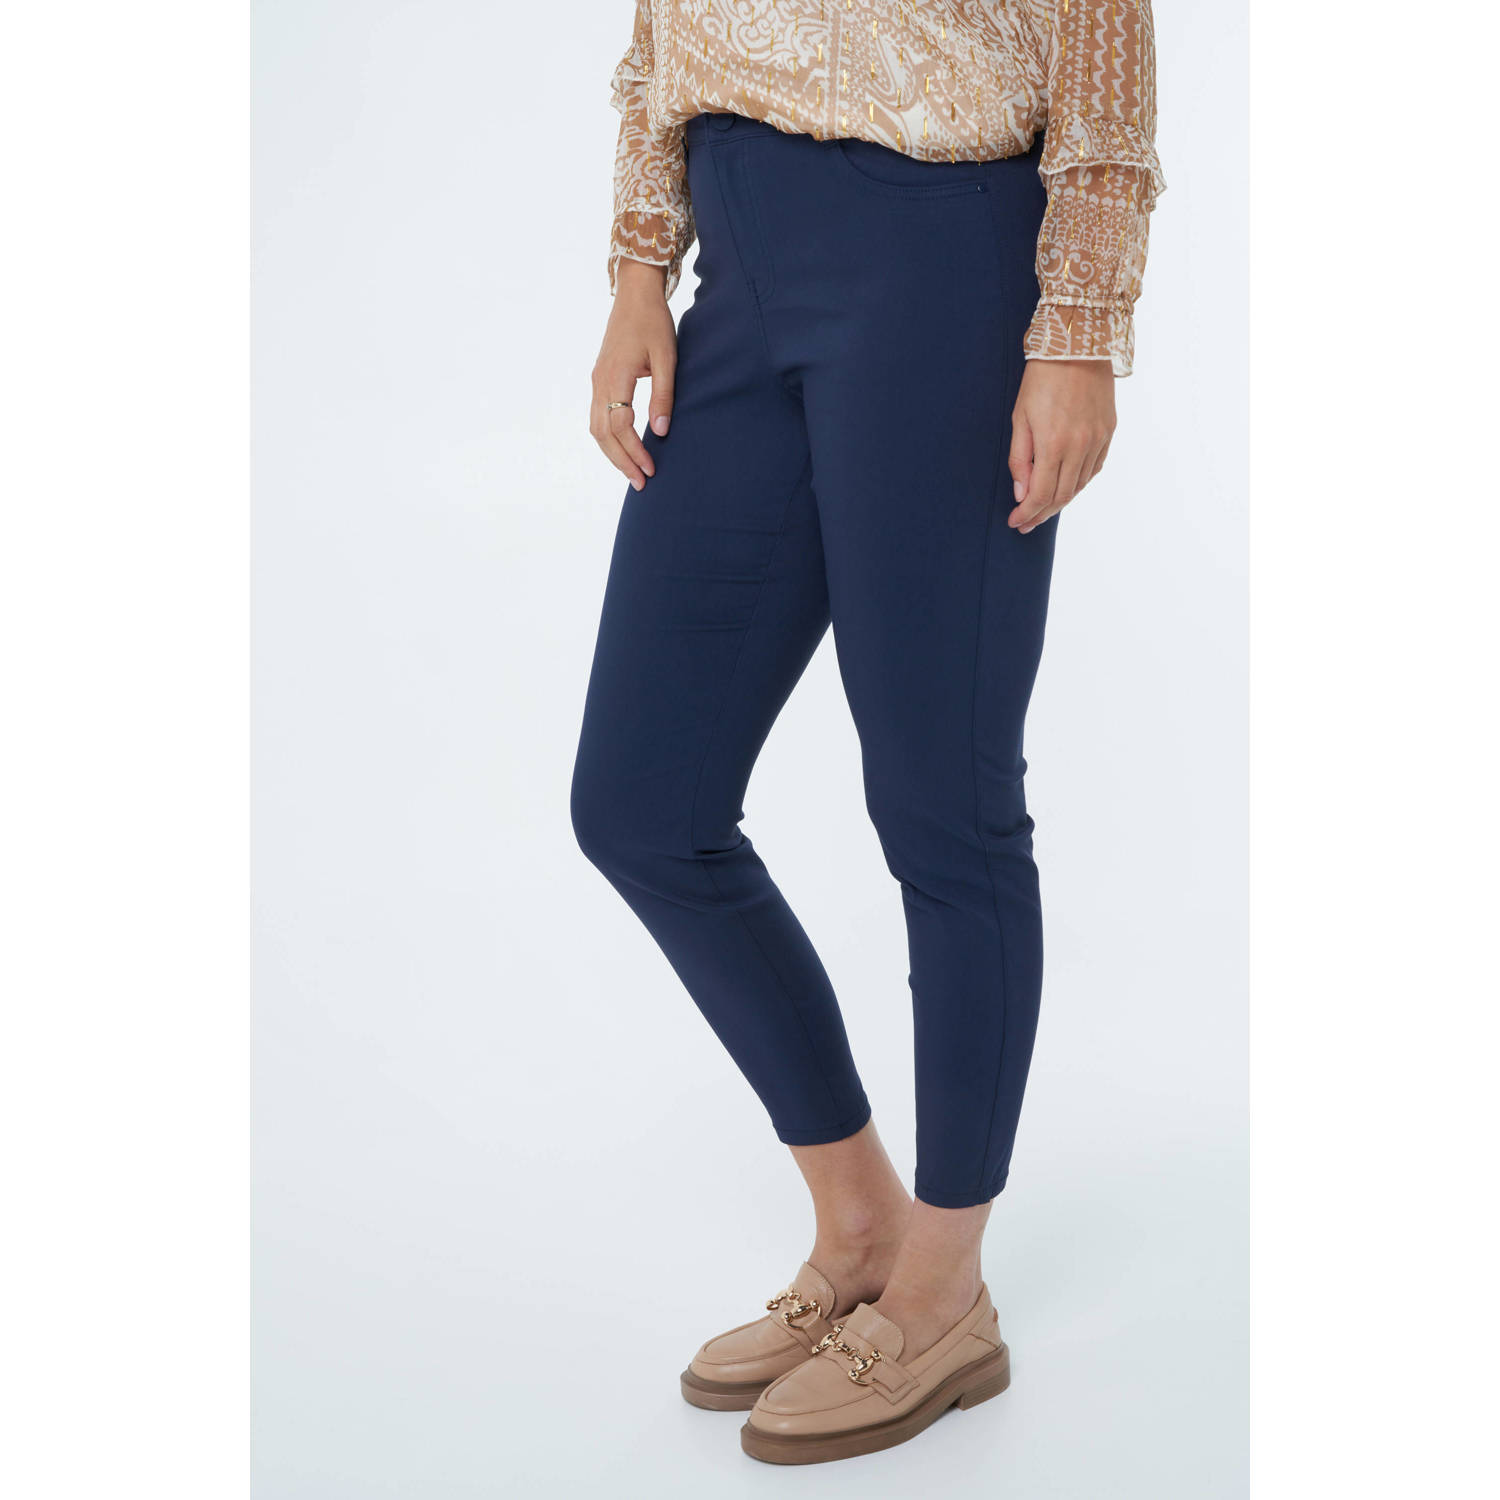 MS Mode jeans donkerblauw